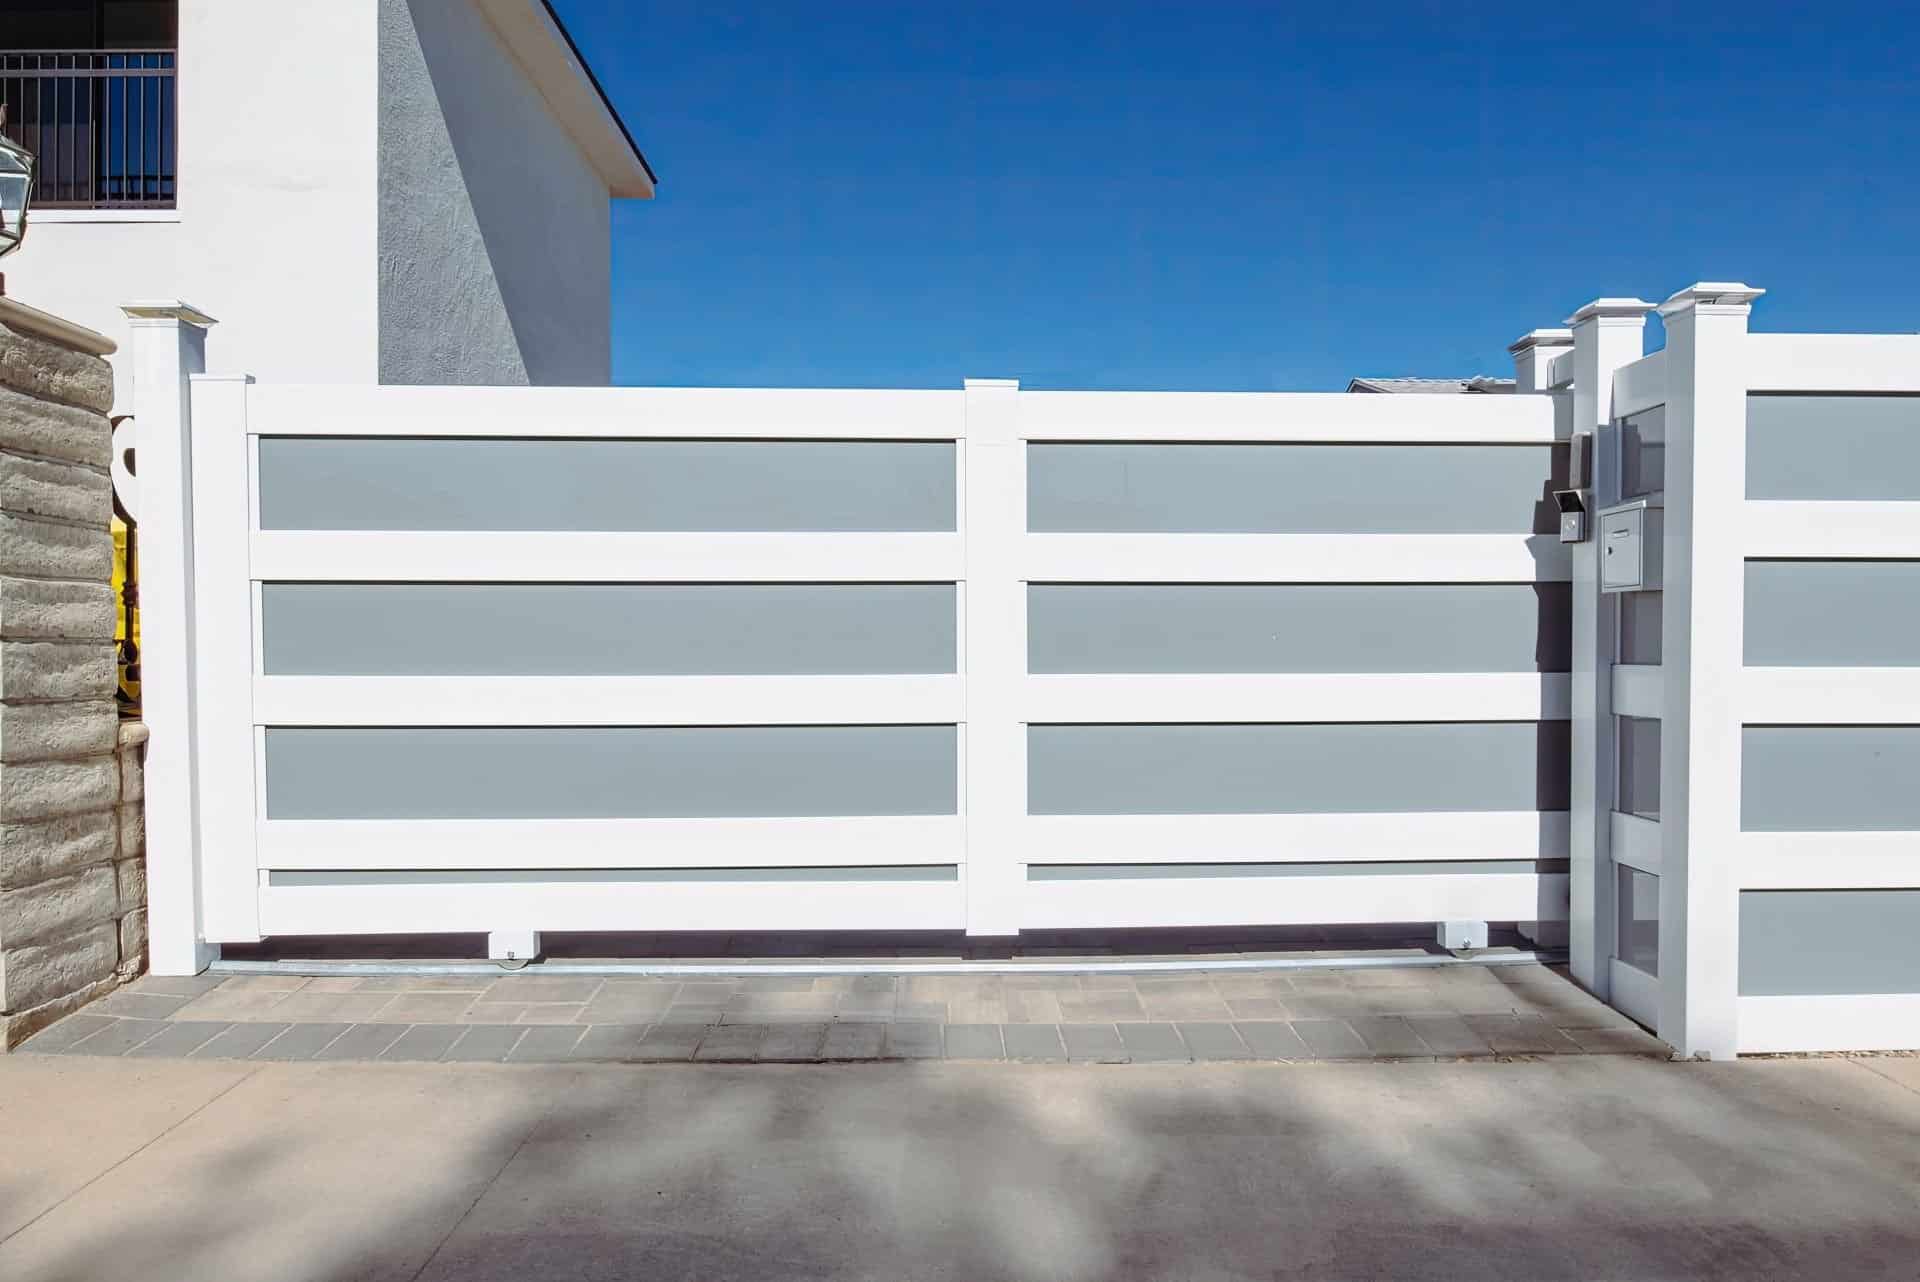 Tall security vinyl rolling gate with white frame and gray sections blocking access to suburban house entrance.